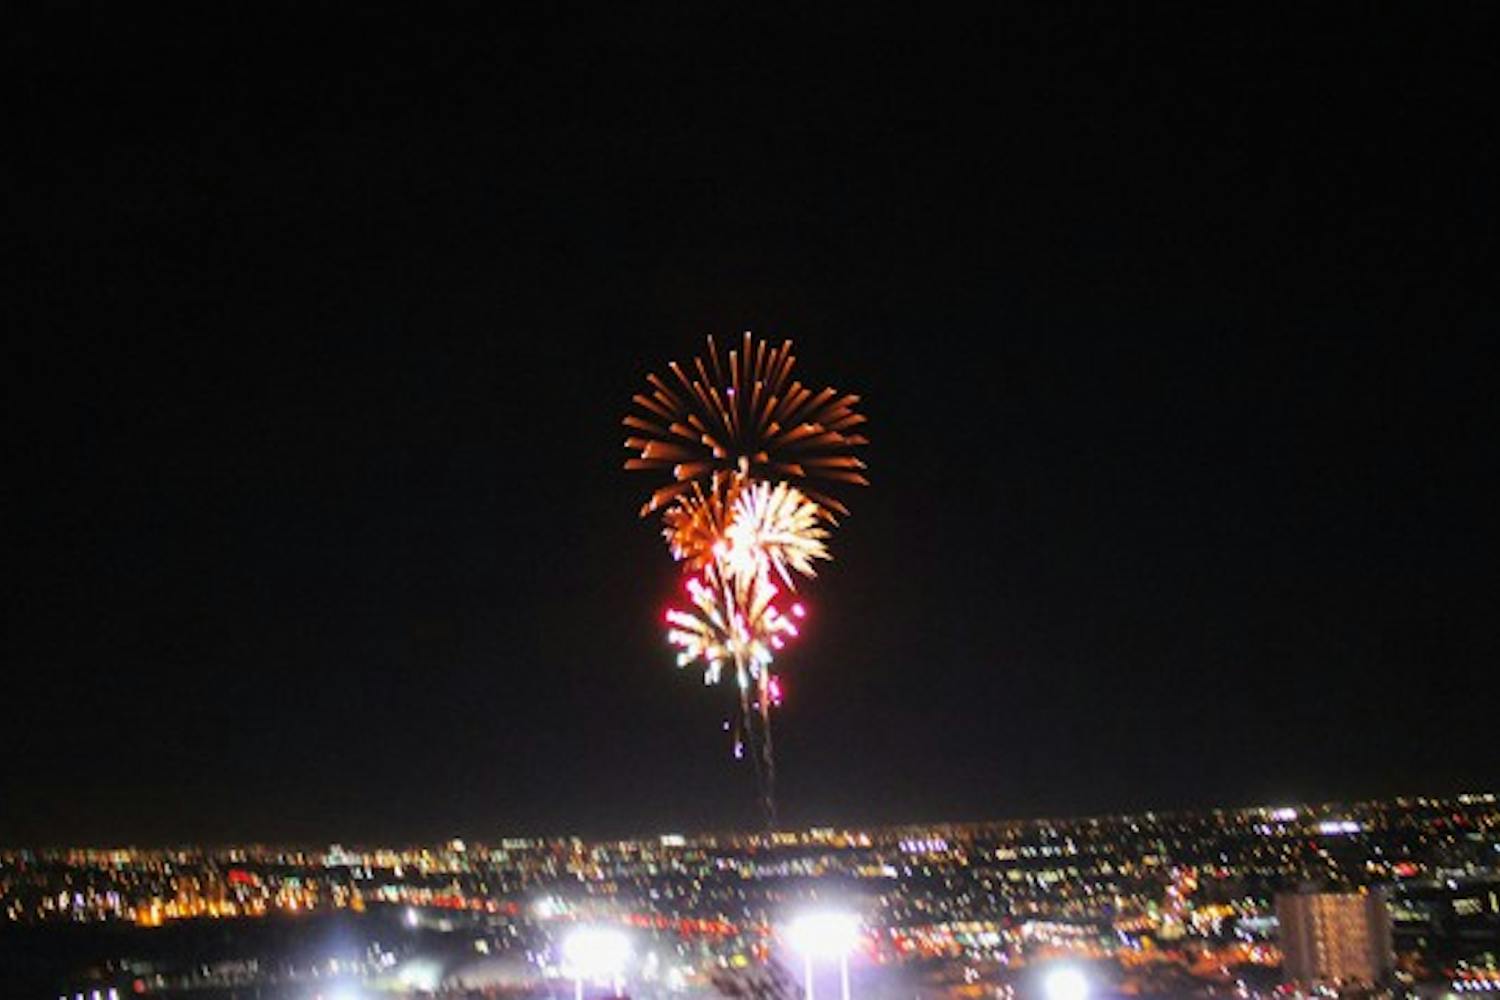 Fireworks shoot into the air above Sun Devil Stadium, after ASU's last touchdown during the ASU vs. Oregon game Thursday night.  (Photo by Jenn Allen)
